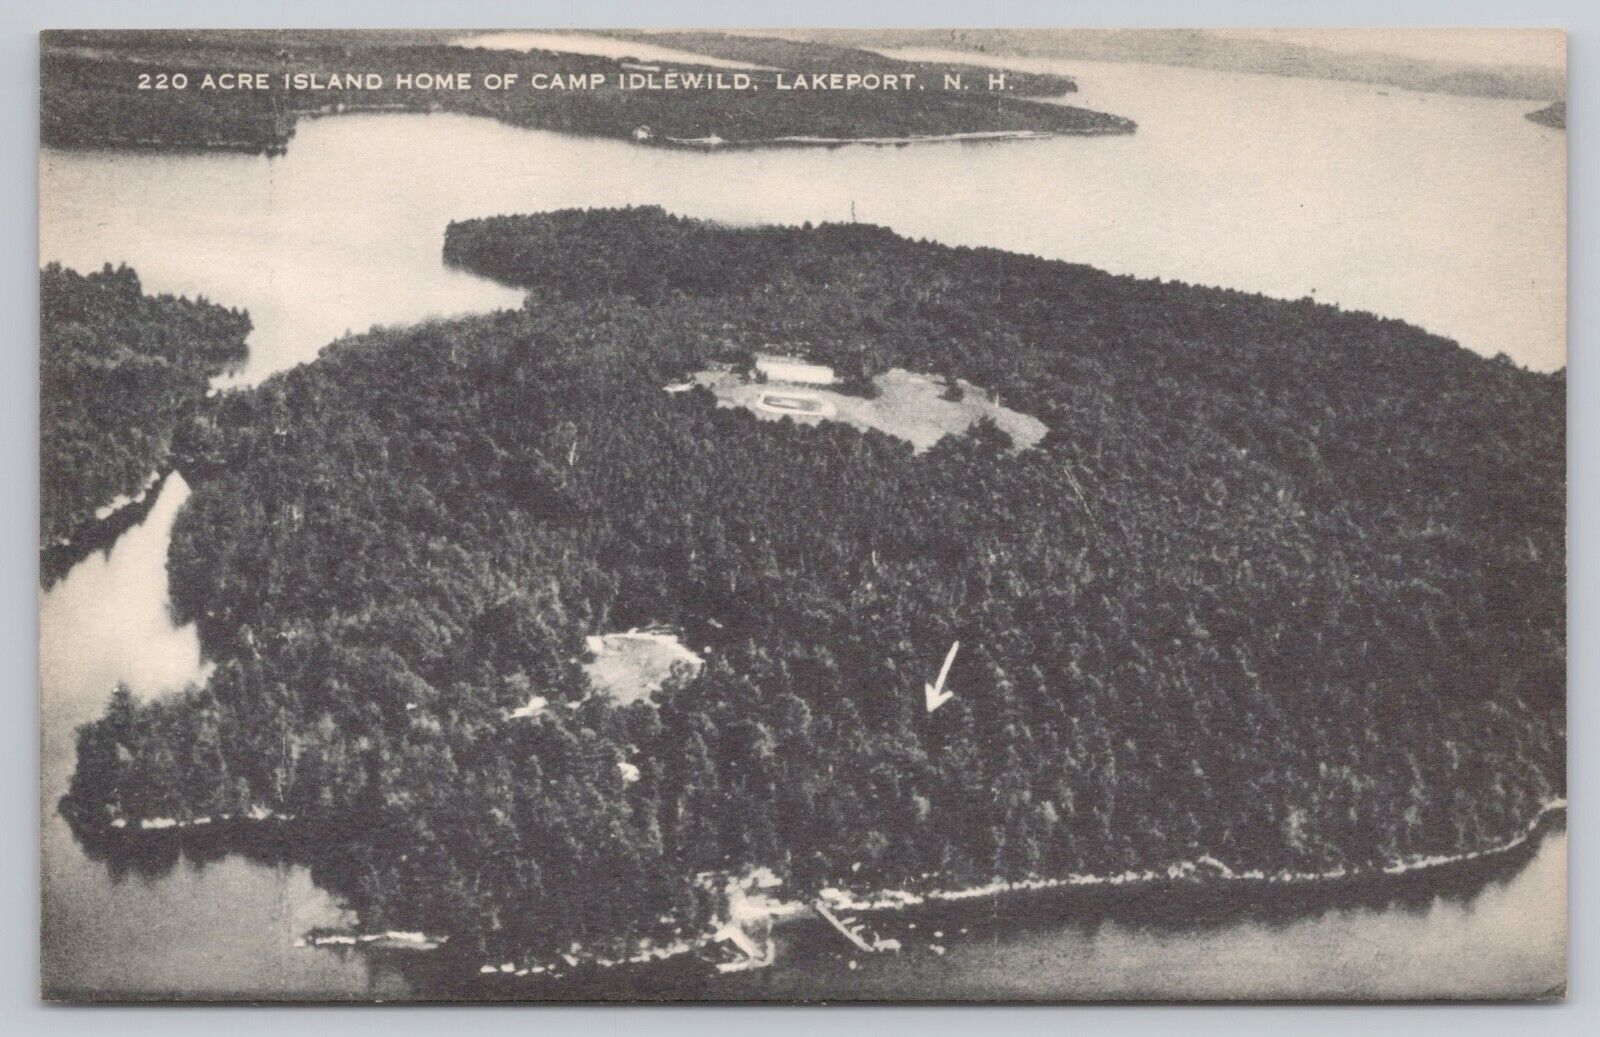 Lakeport New Hampshire, Camp Idlewild Island Home, Aerial View, Vintage Postcard